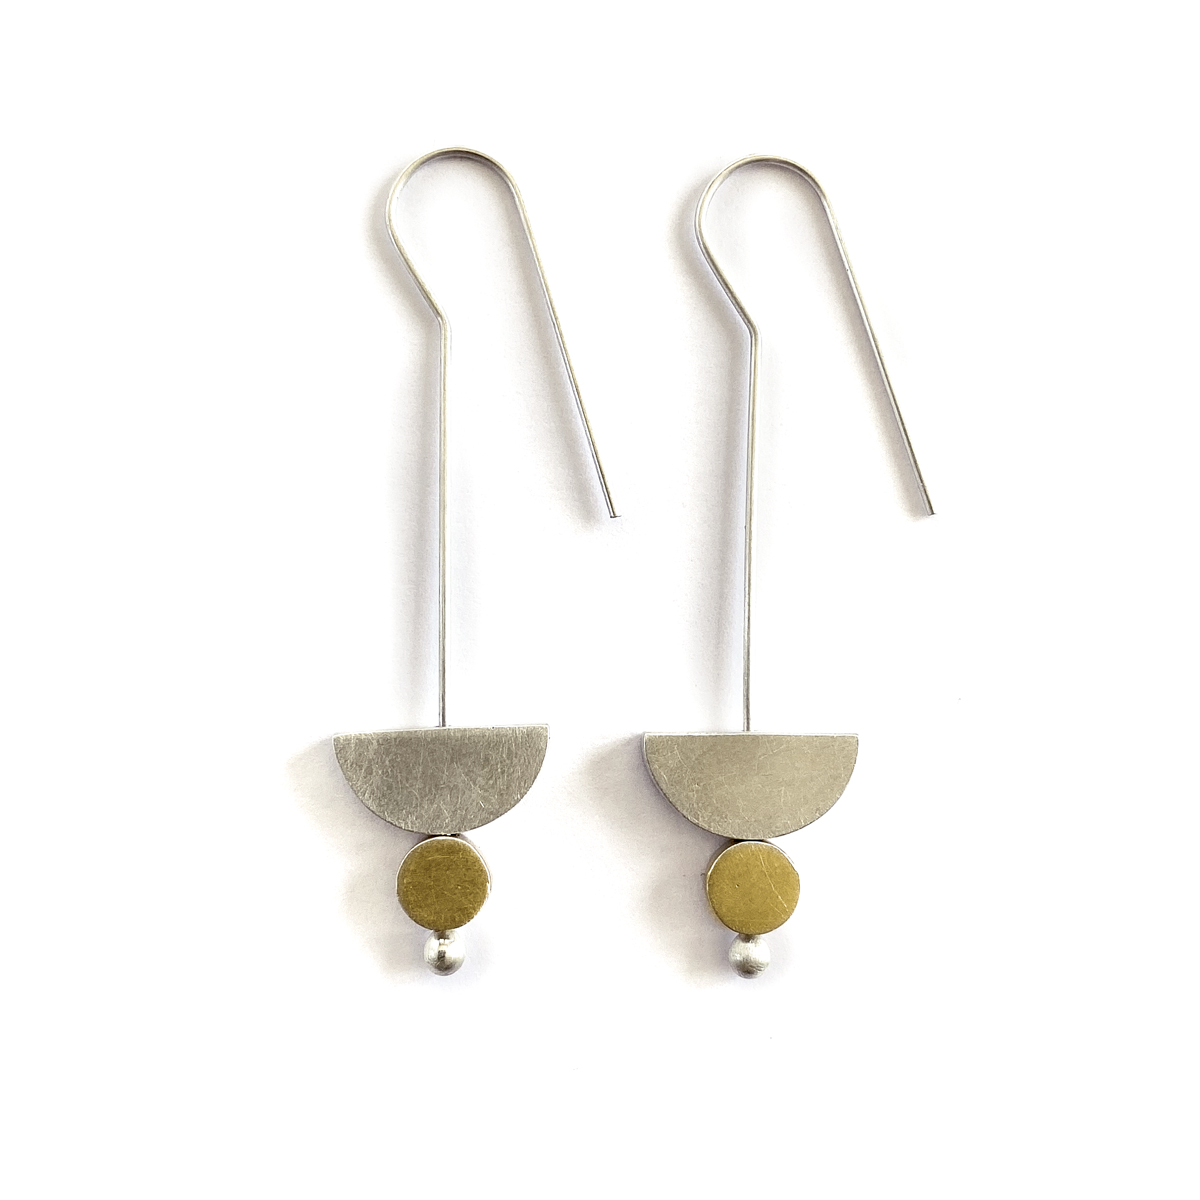 Hanging In The Balance, sterling silver, 9ct gold, 2020, Kate Alterio